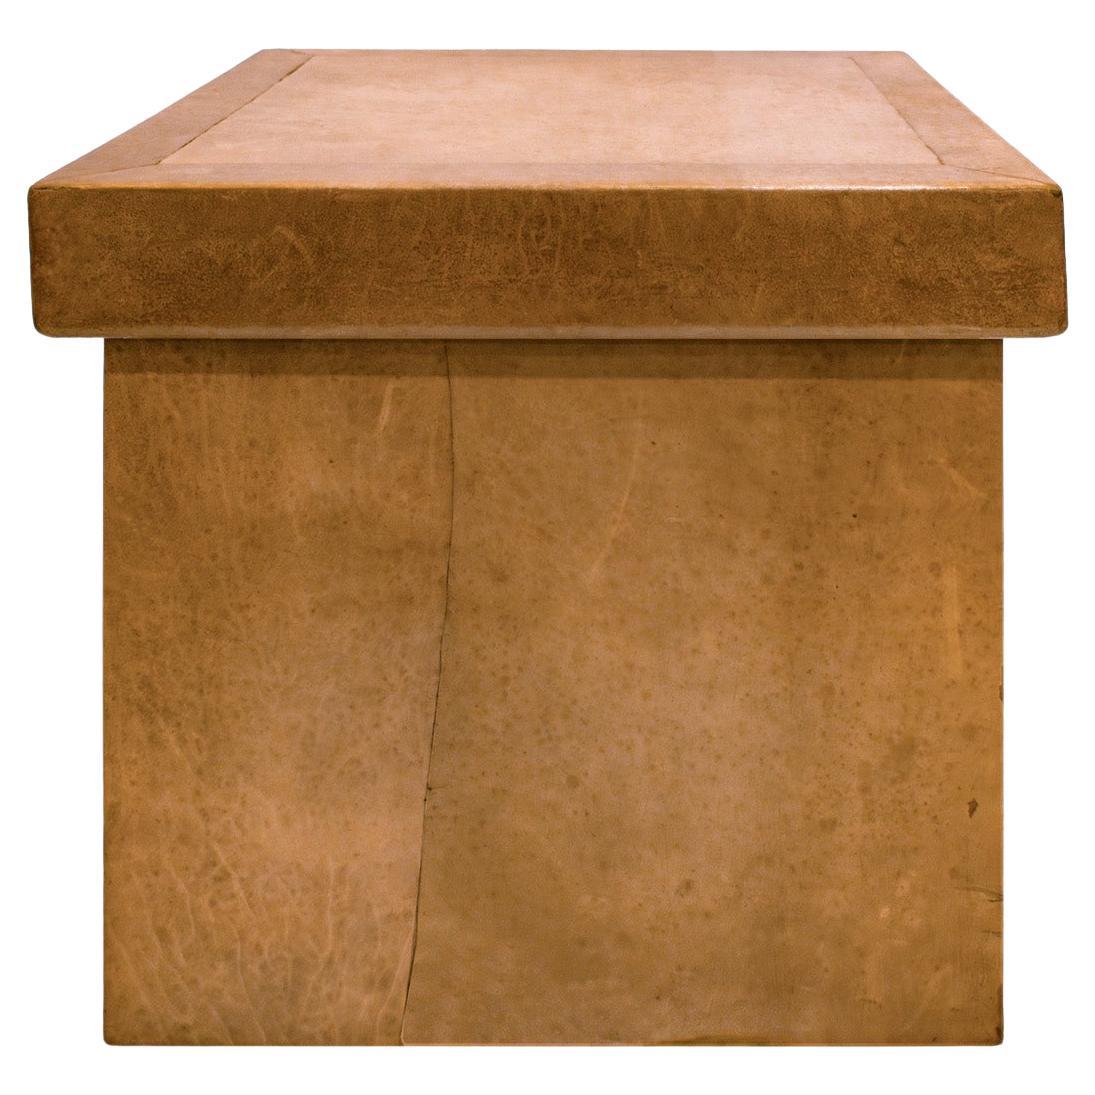 Karl Springer Exceptional Box Table In Leather 1976-1978